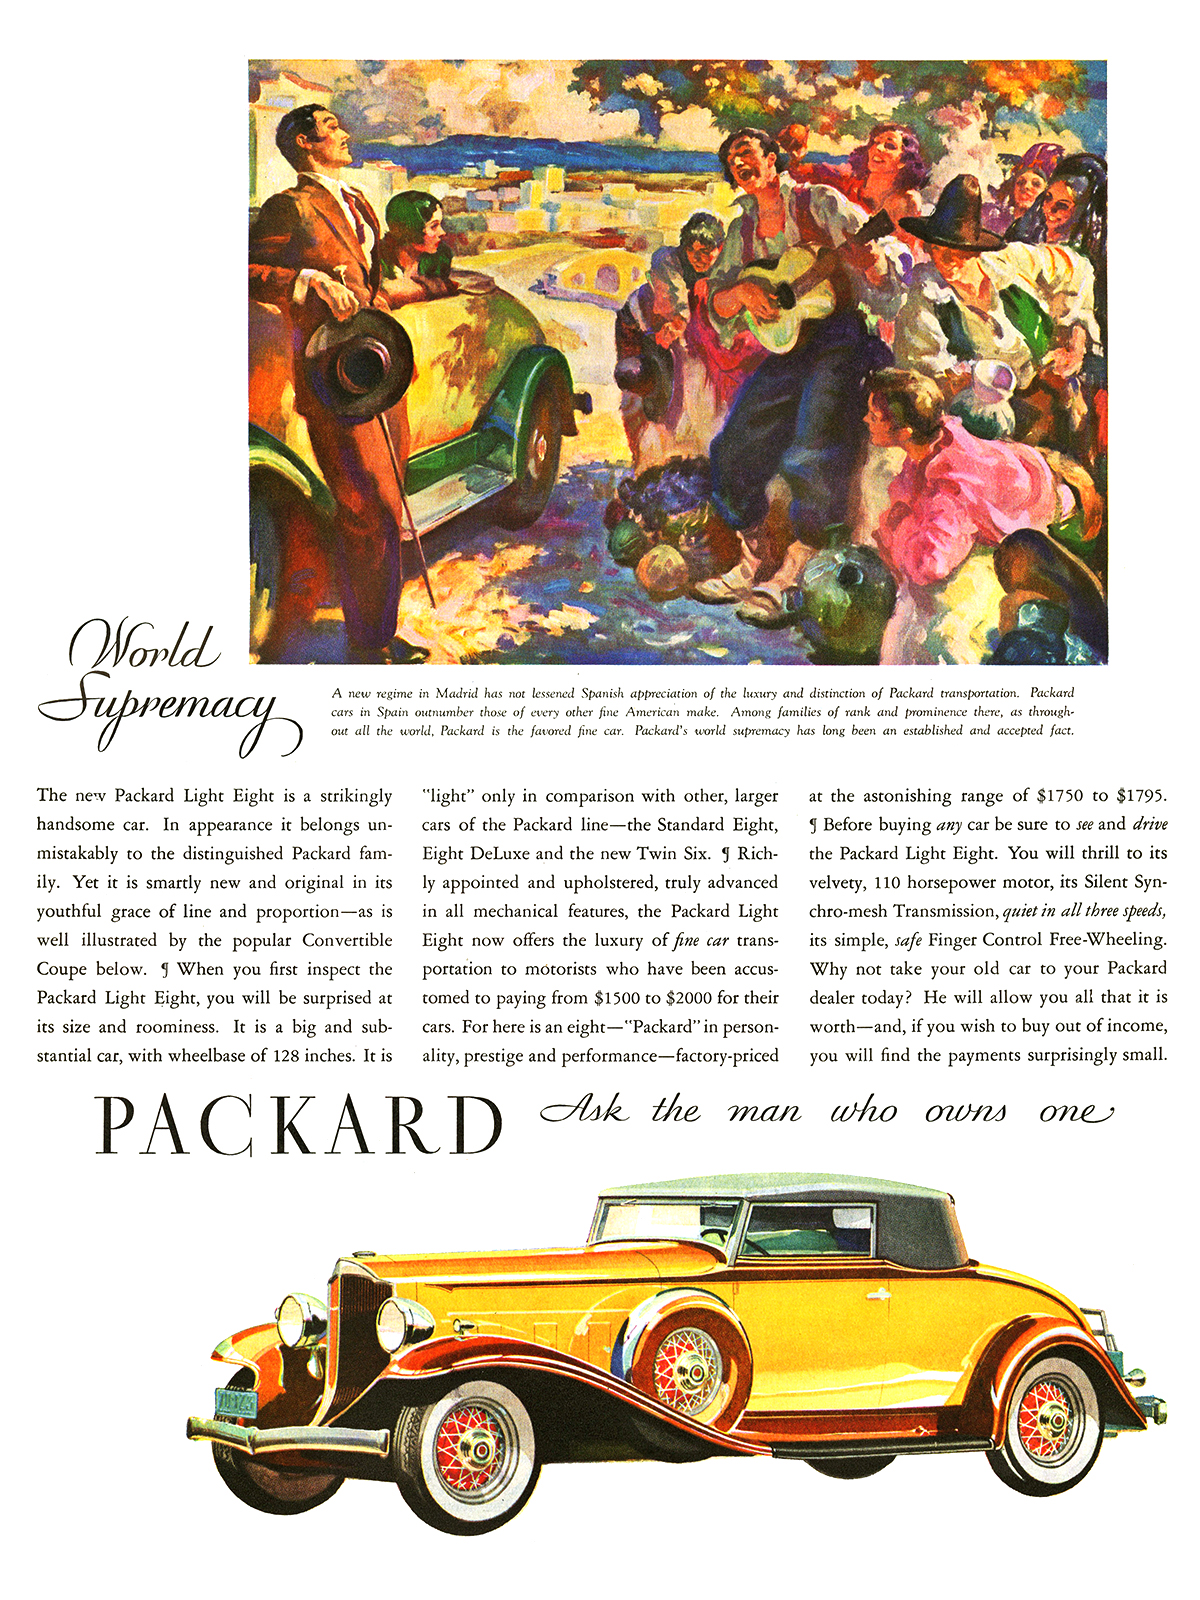 Packard Light Eight Convertible Coupe Ad (May, 1932): Madrid, Spain